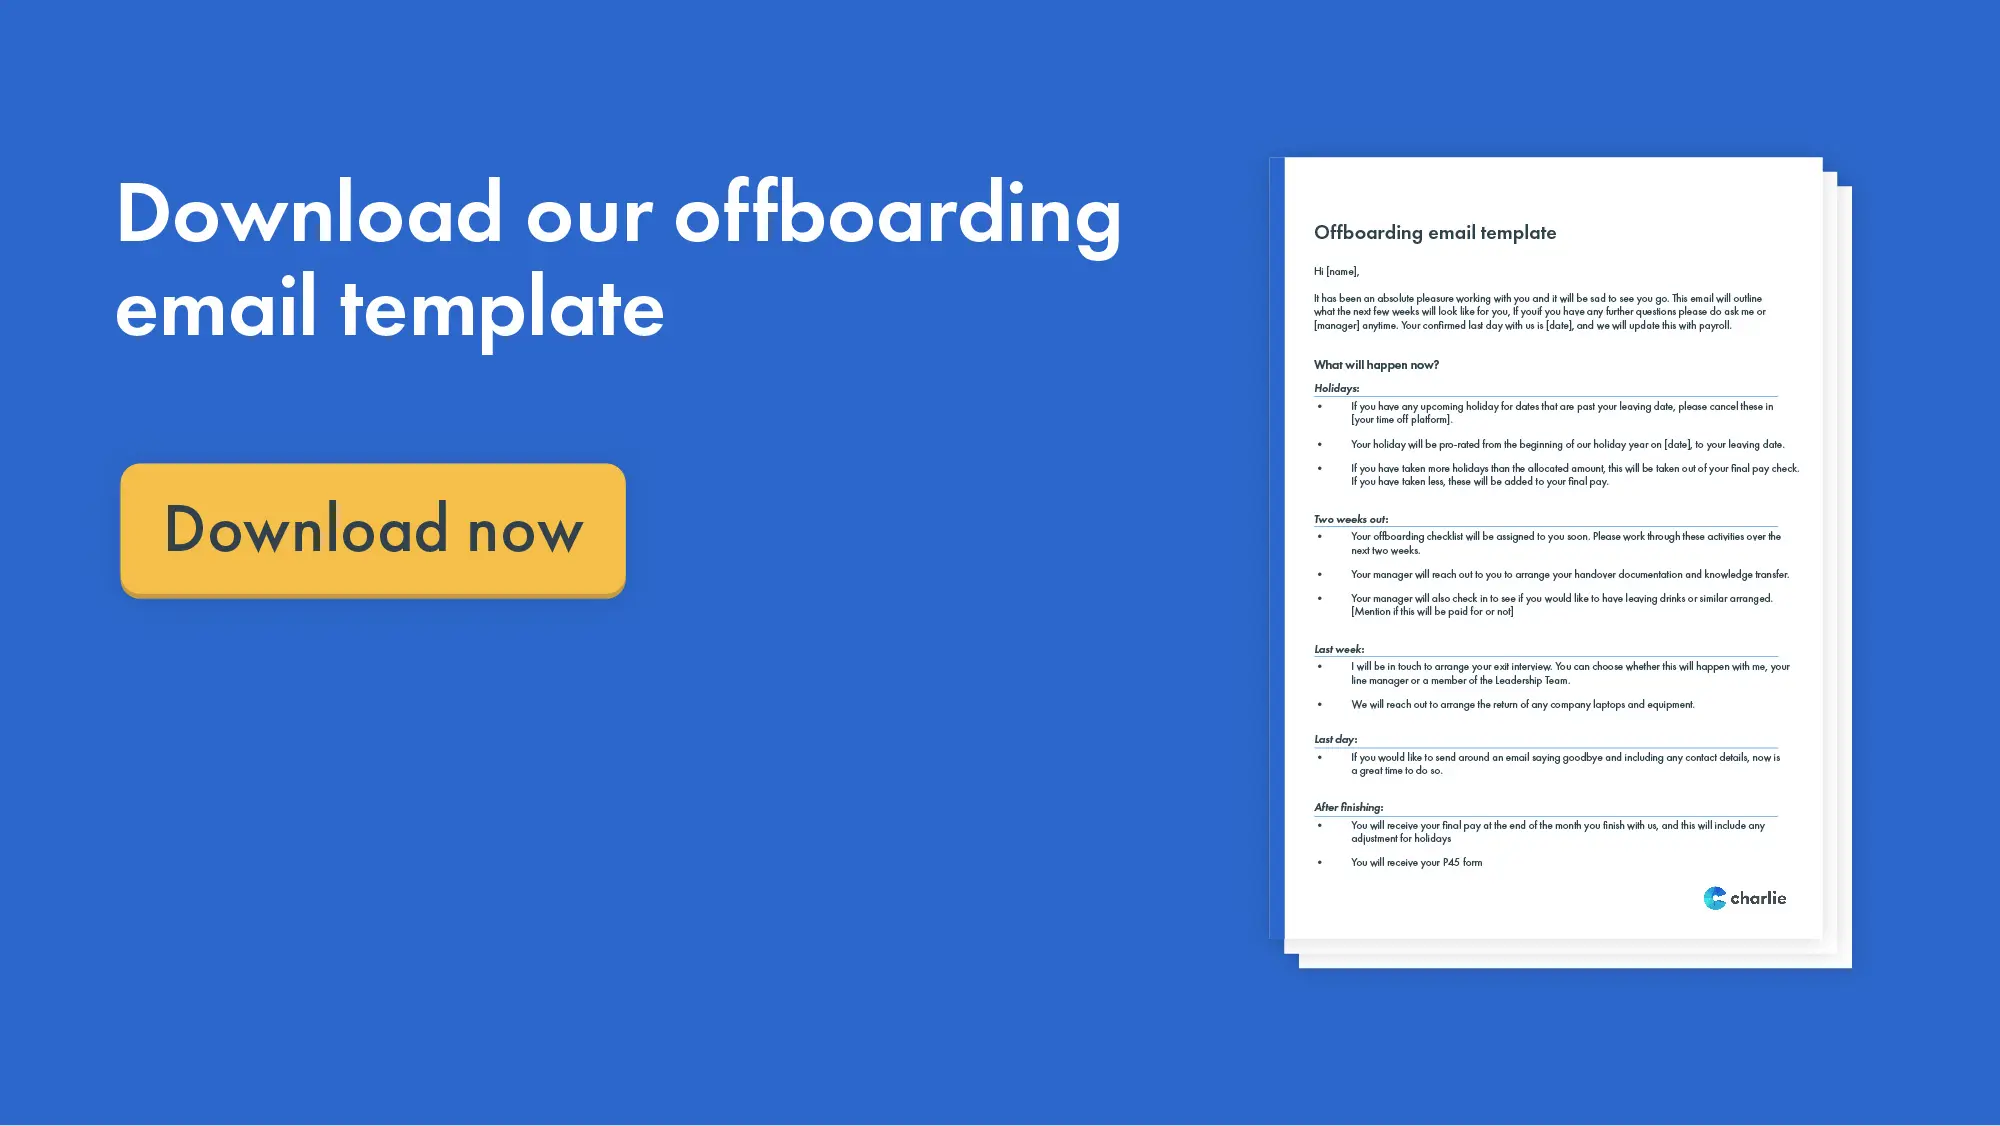 Click here to download our offboarding email template